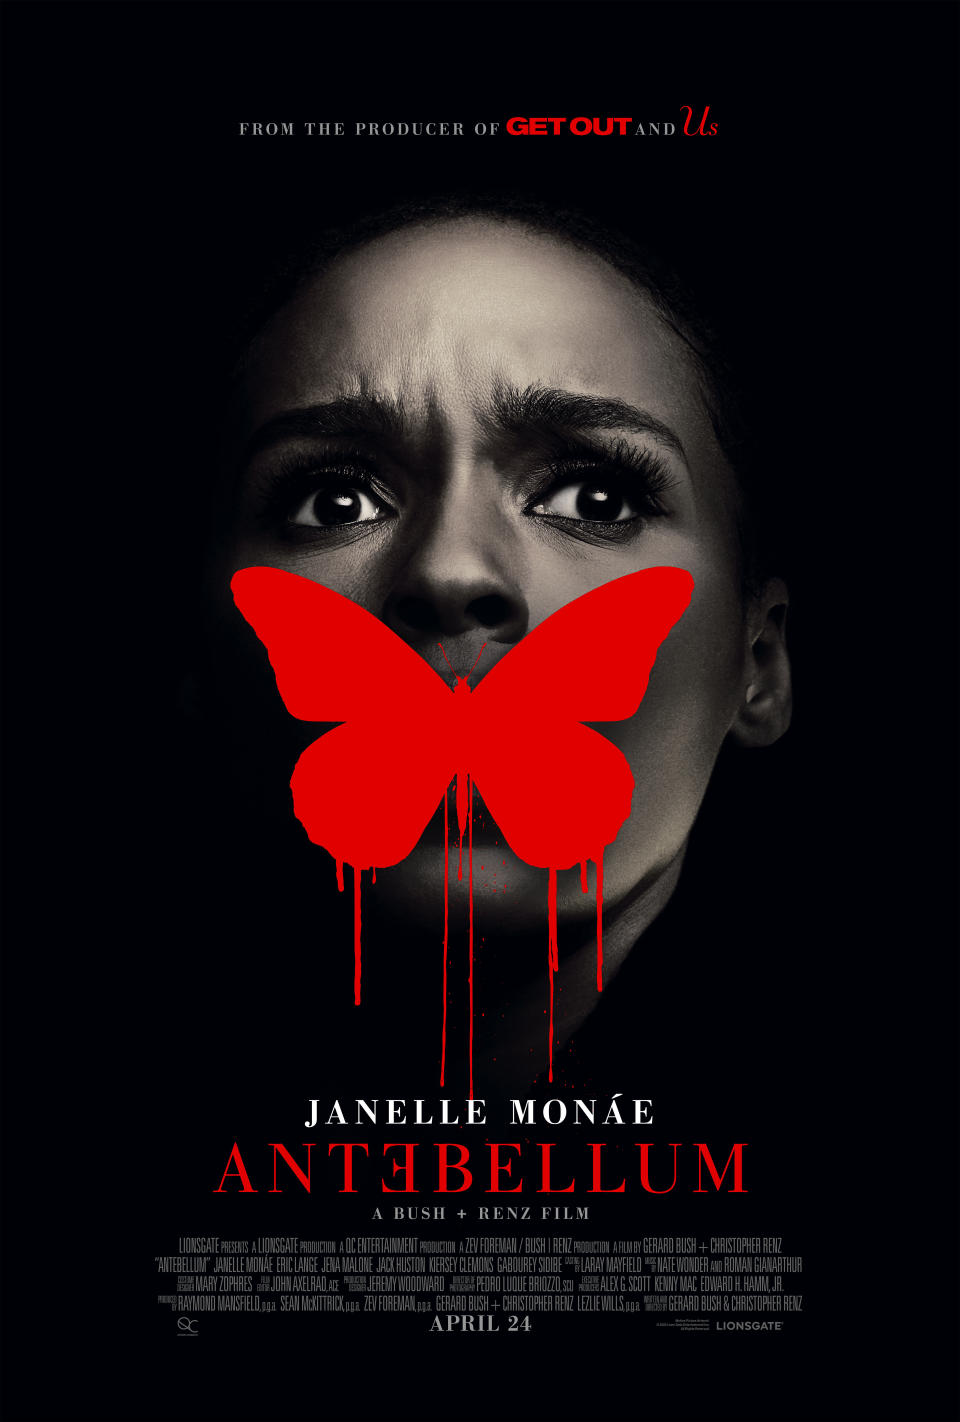 The official poster for "Antebellum." (Photo: Lionsgate)